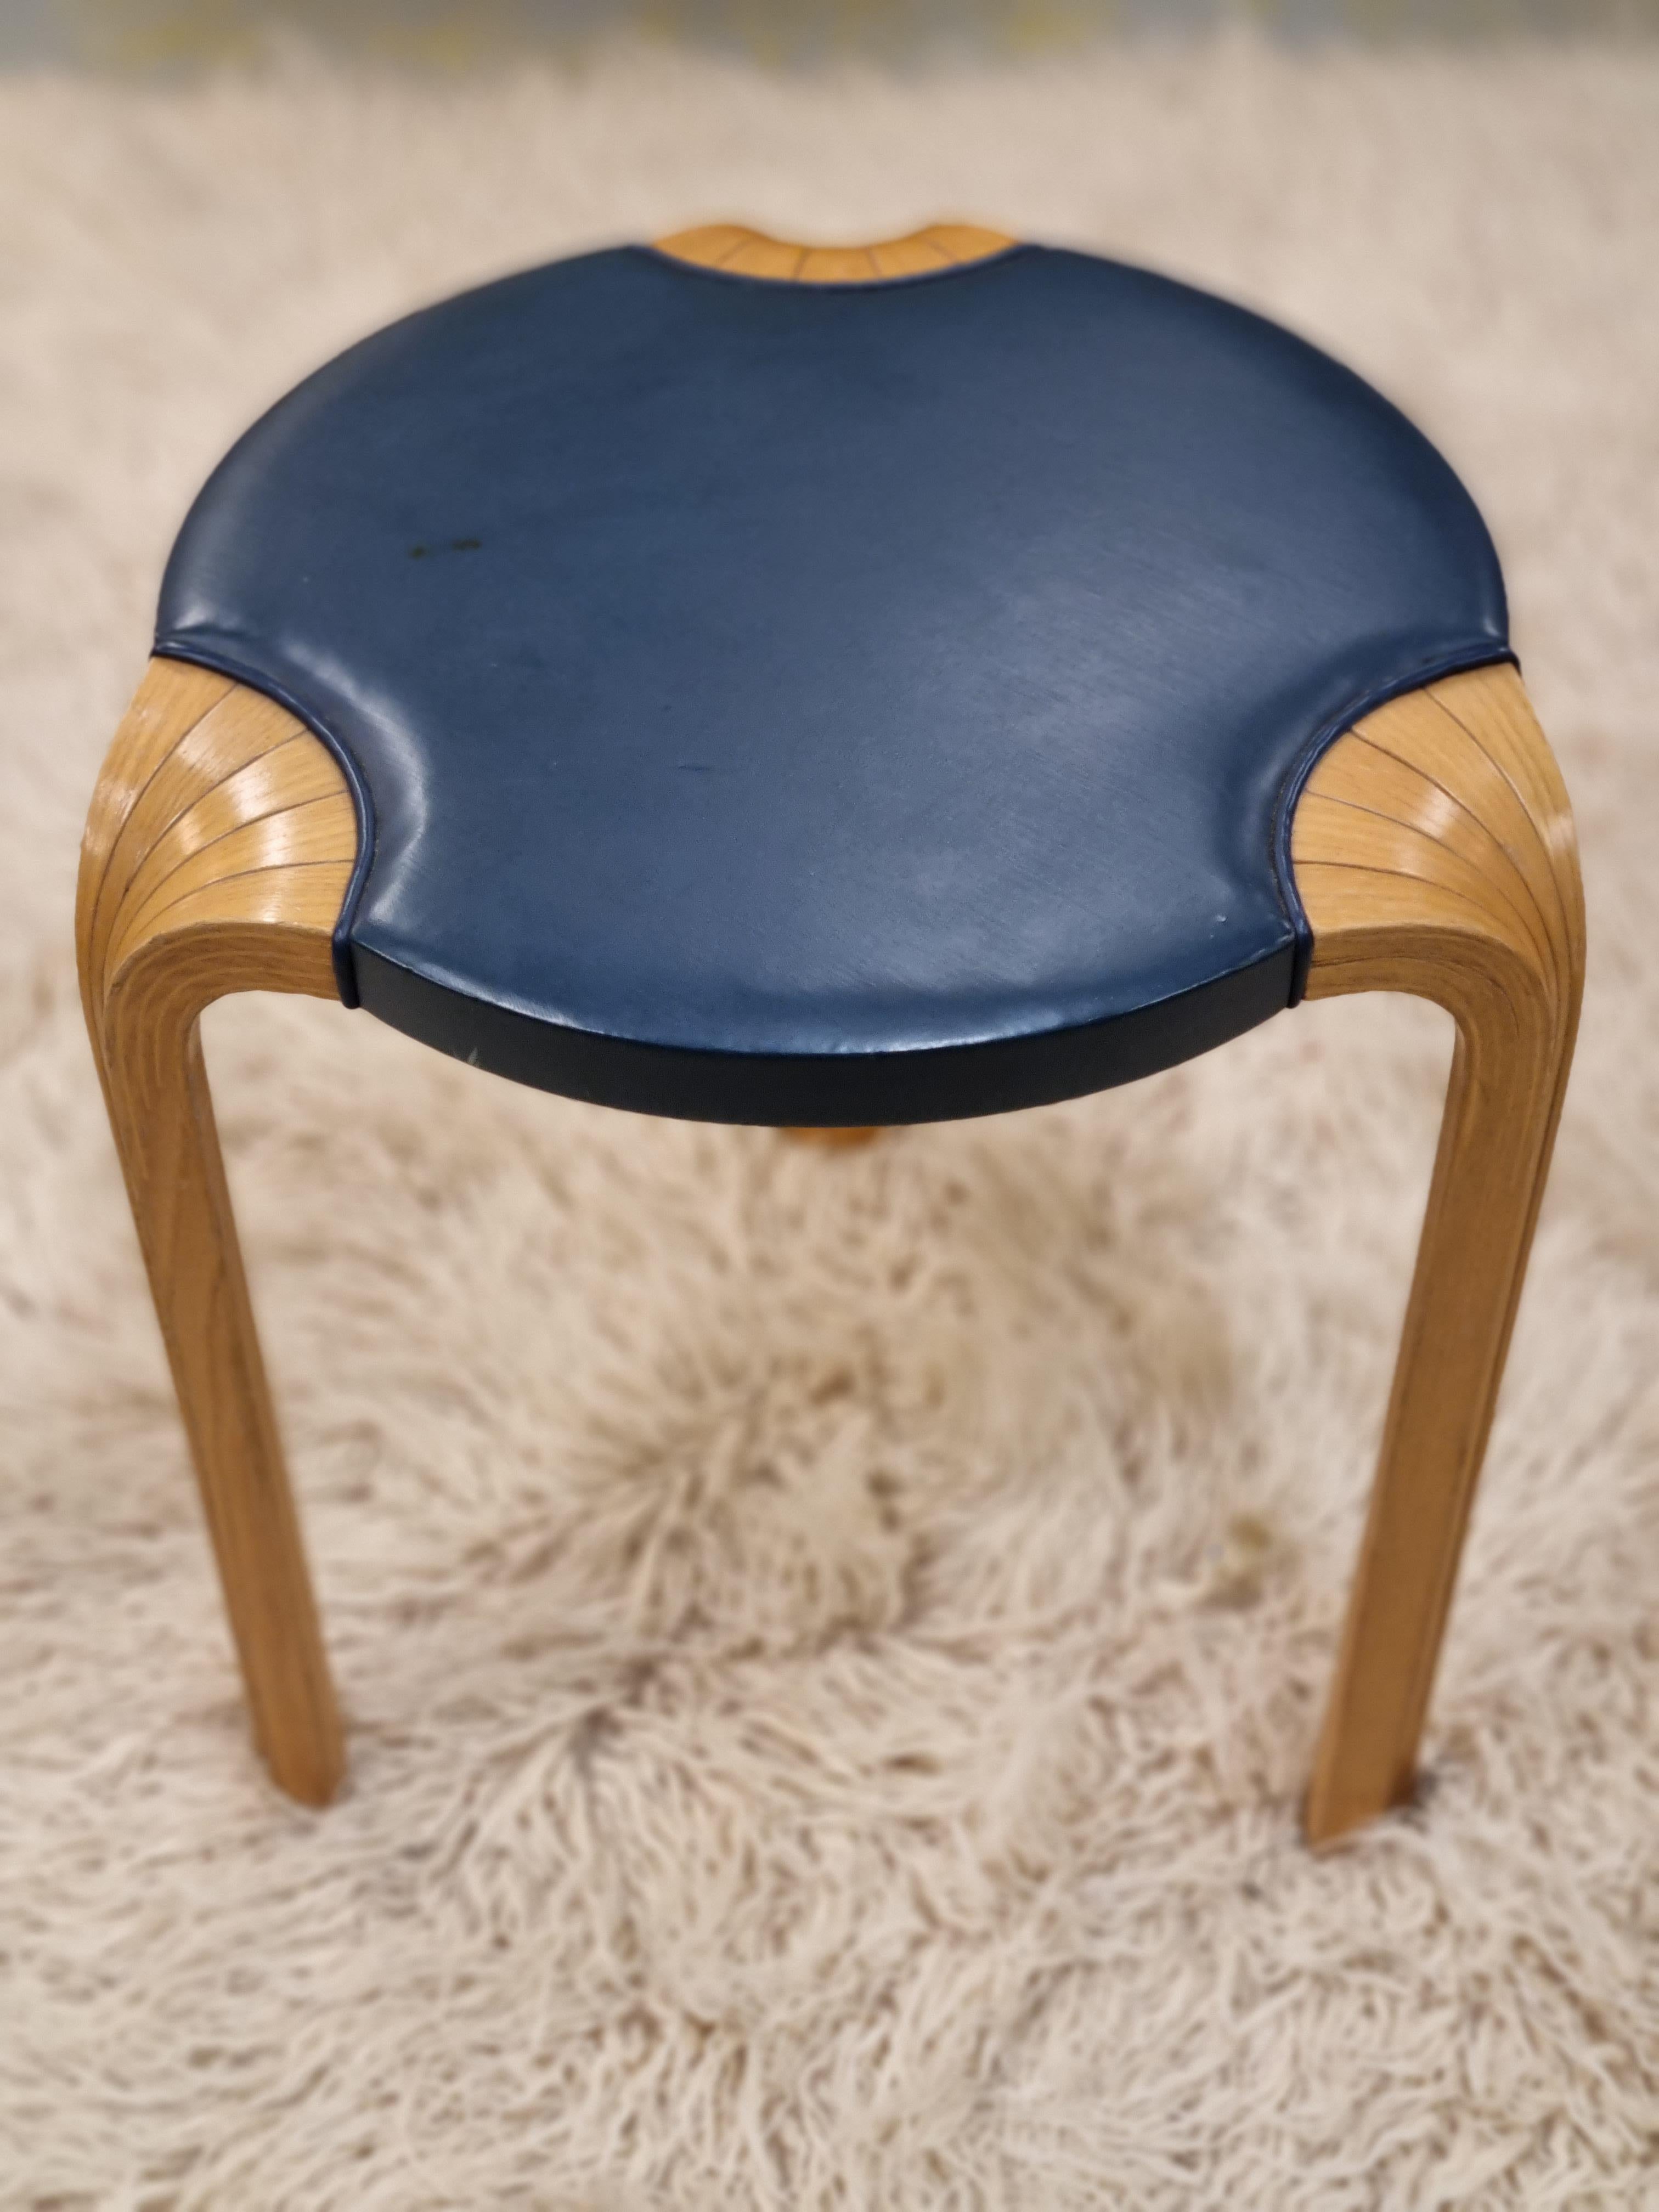 Even though simple, this stool comes with great quality and attention to details. The less common X-leg with the leather padding bring plain beauty. The original blue leather makes this piece quite rare. This stool is in good condition with some